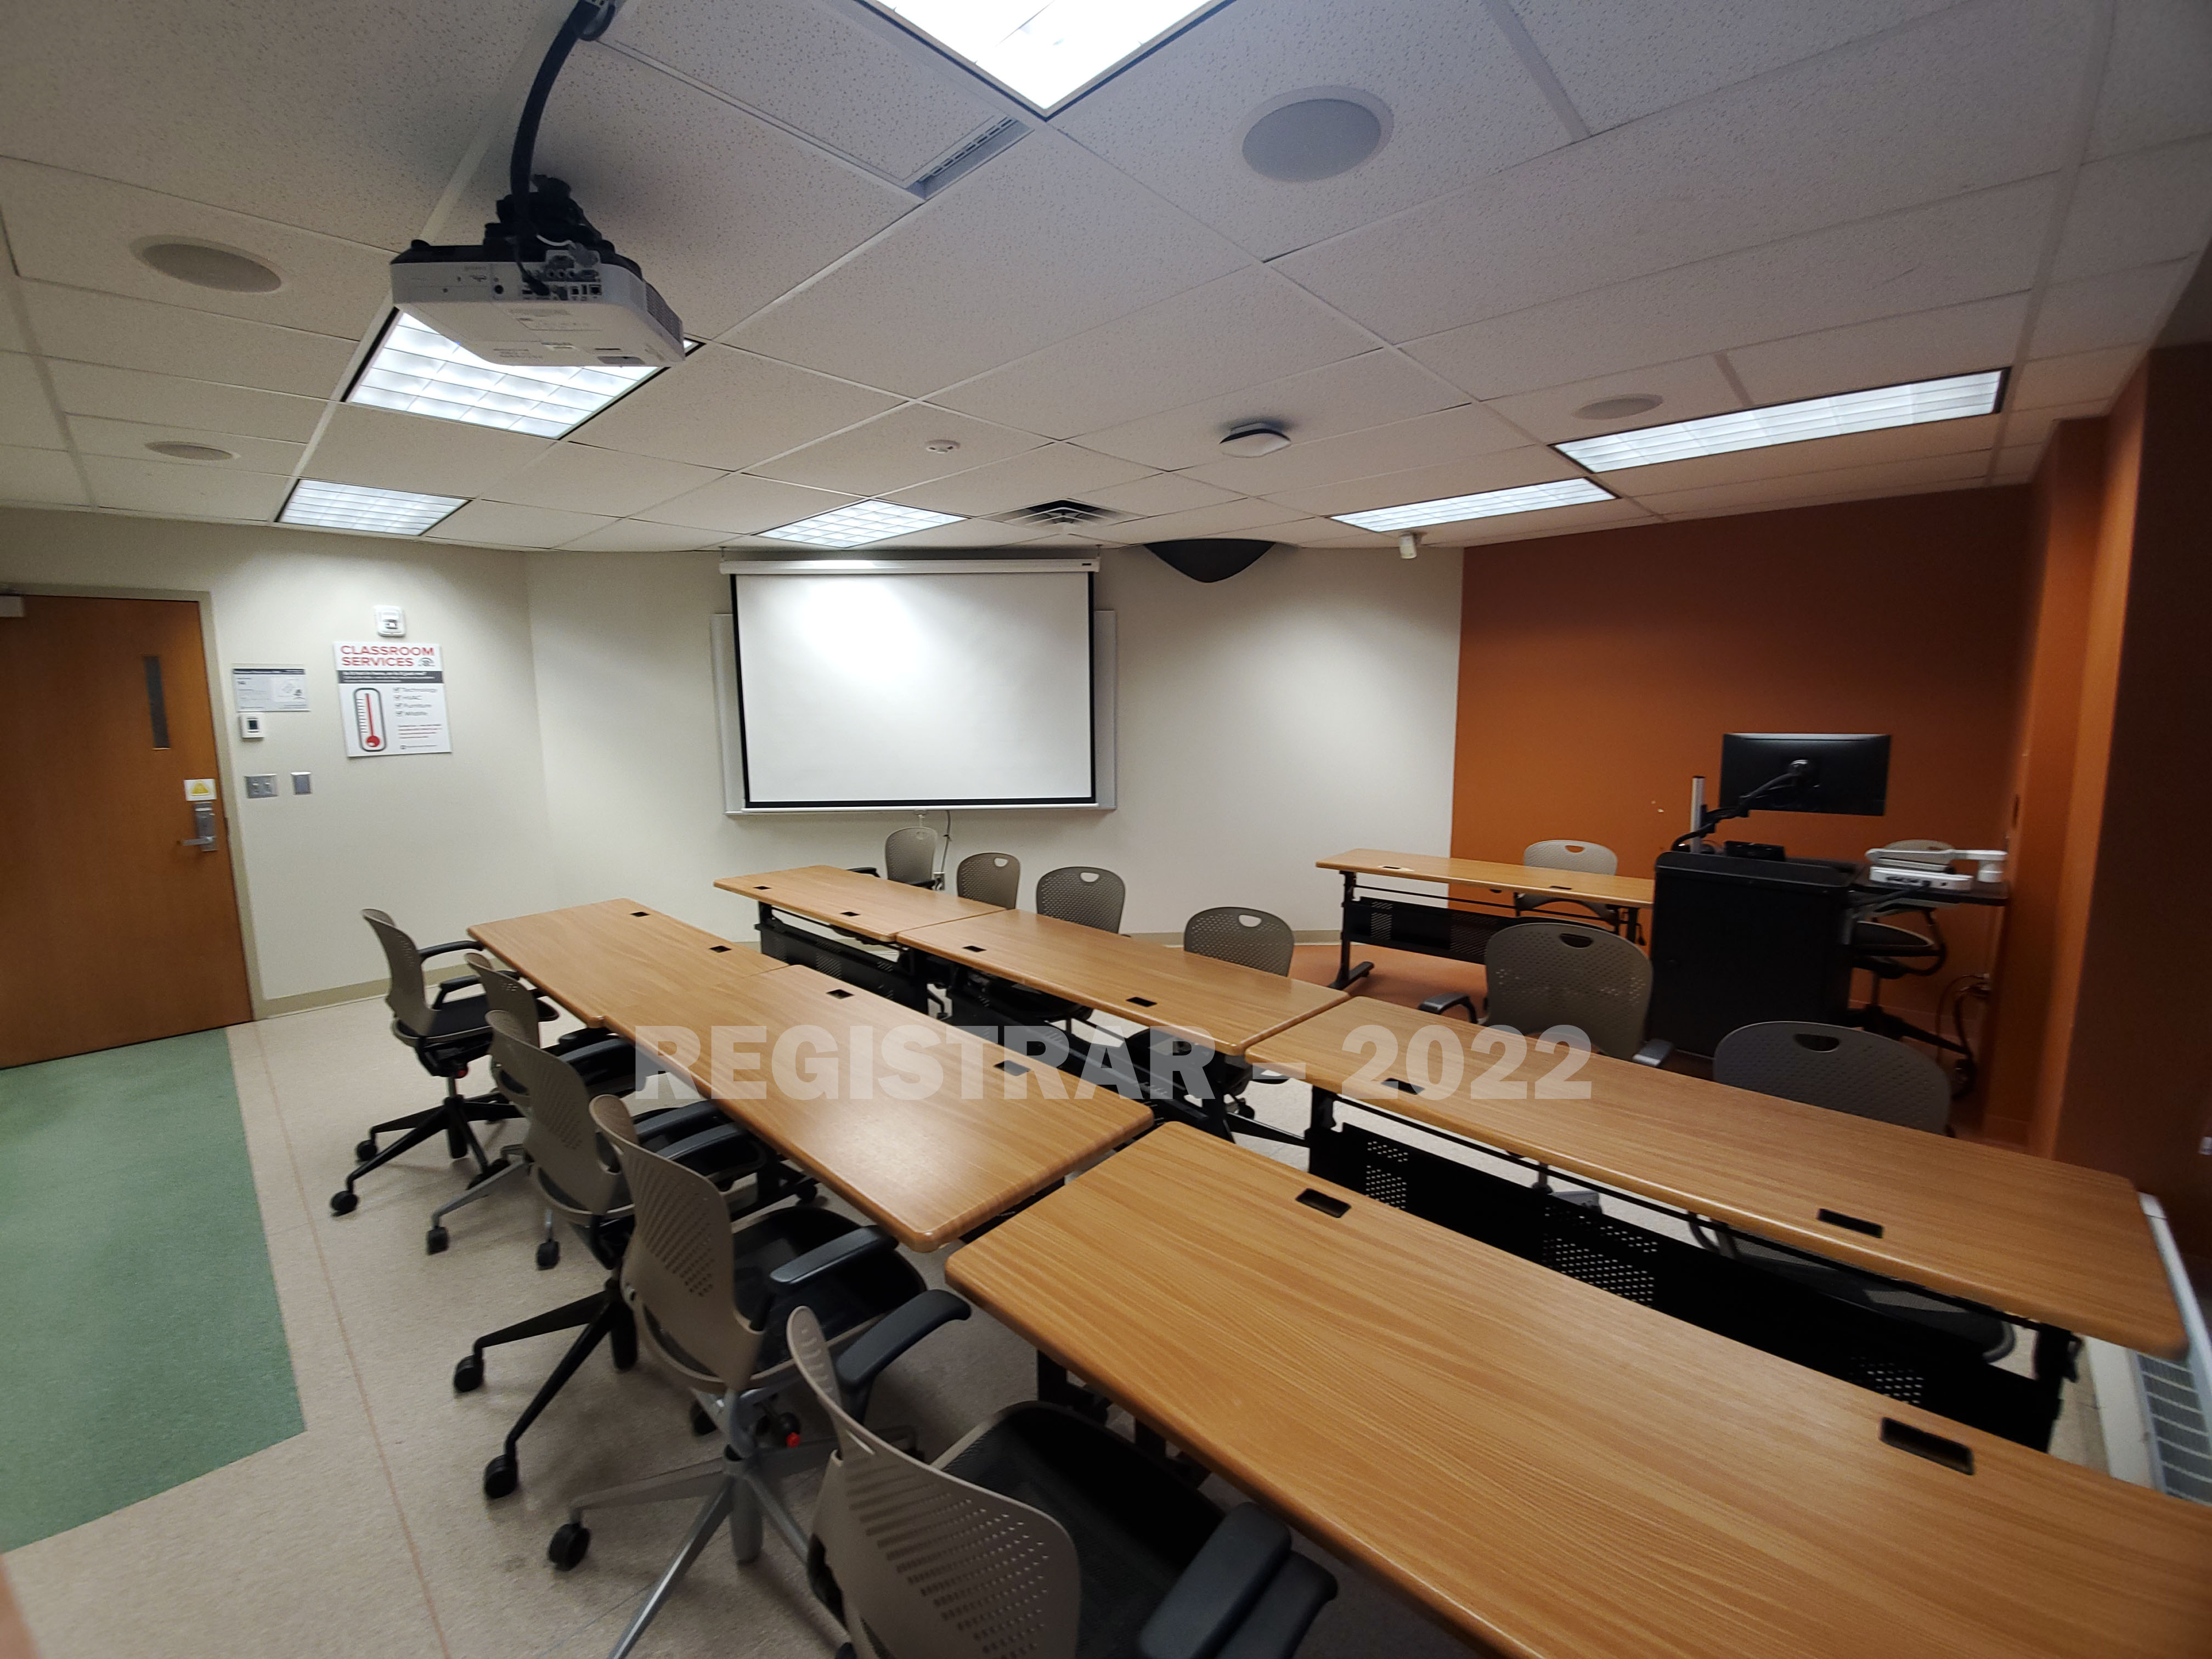 Enarson Classroom Building room 348 ultra wide angle view from the back of the room with projector screen down